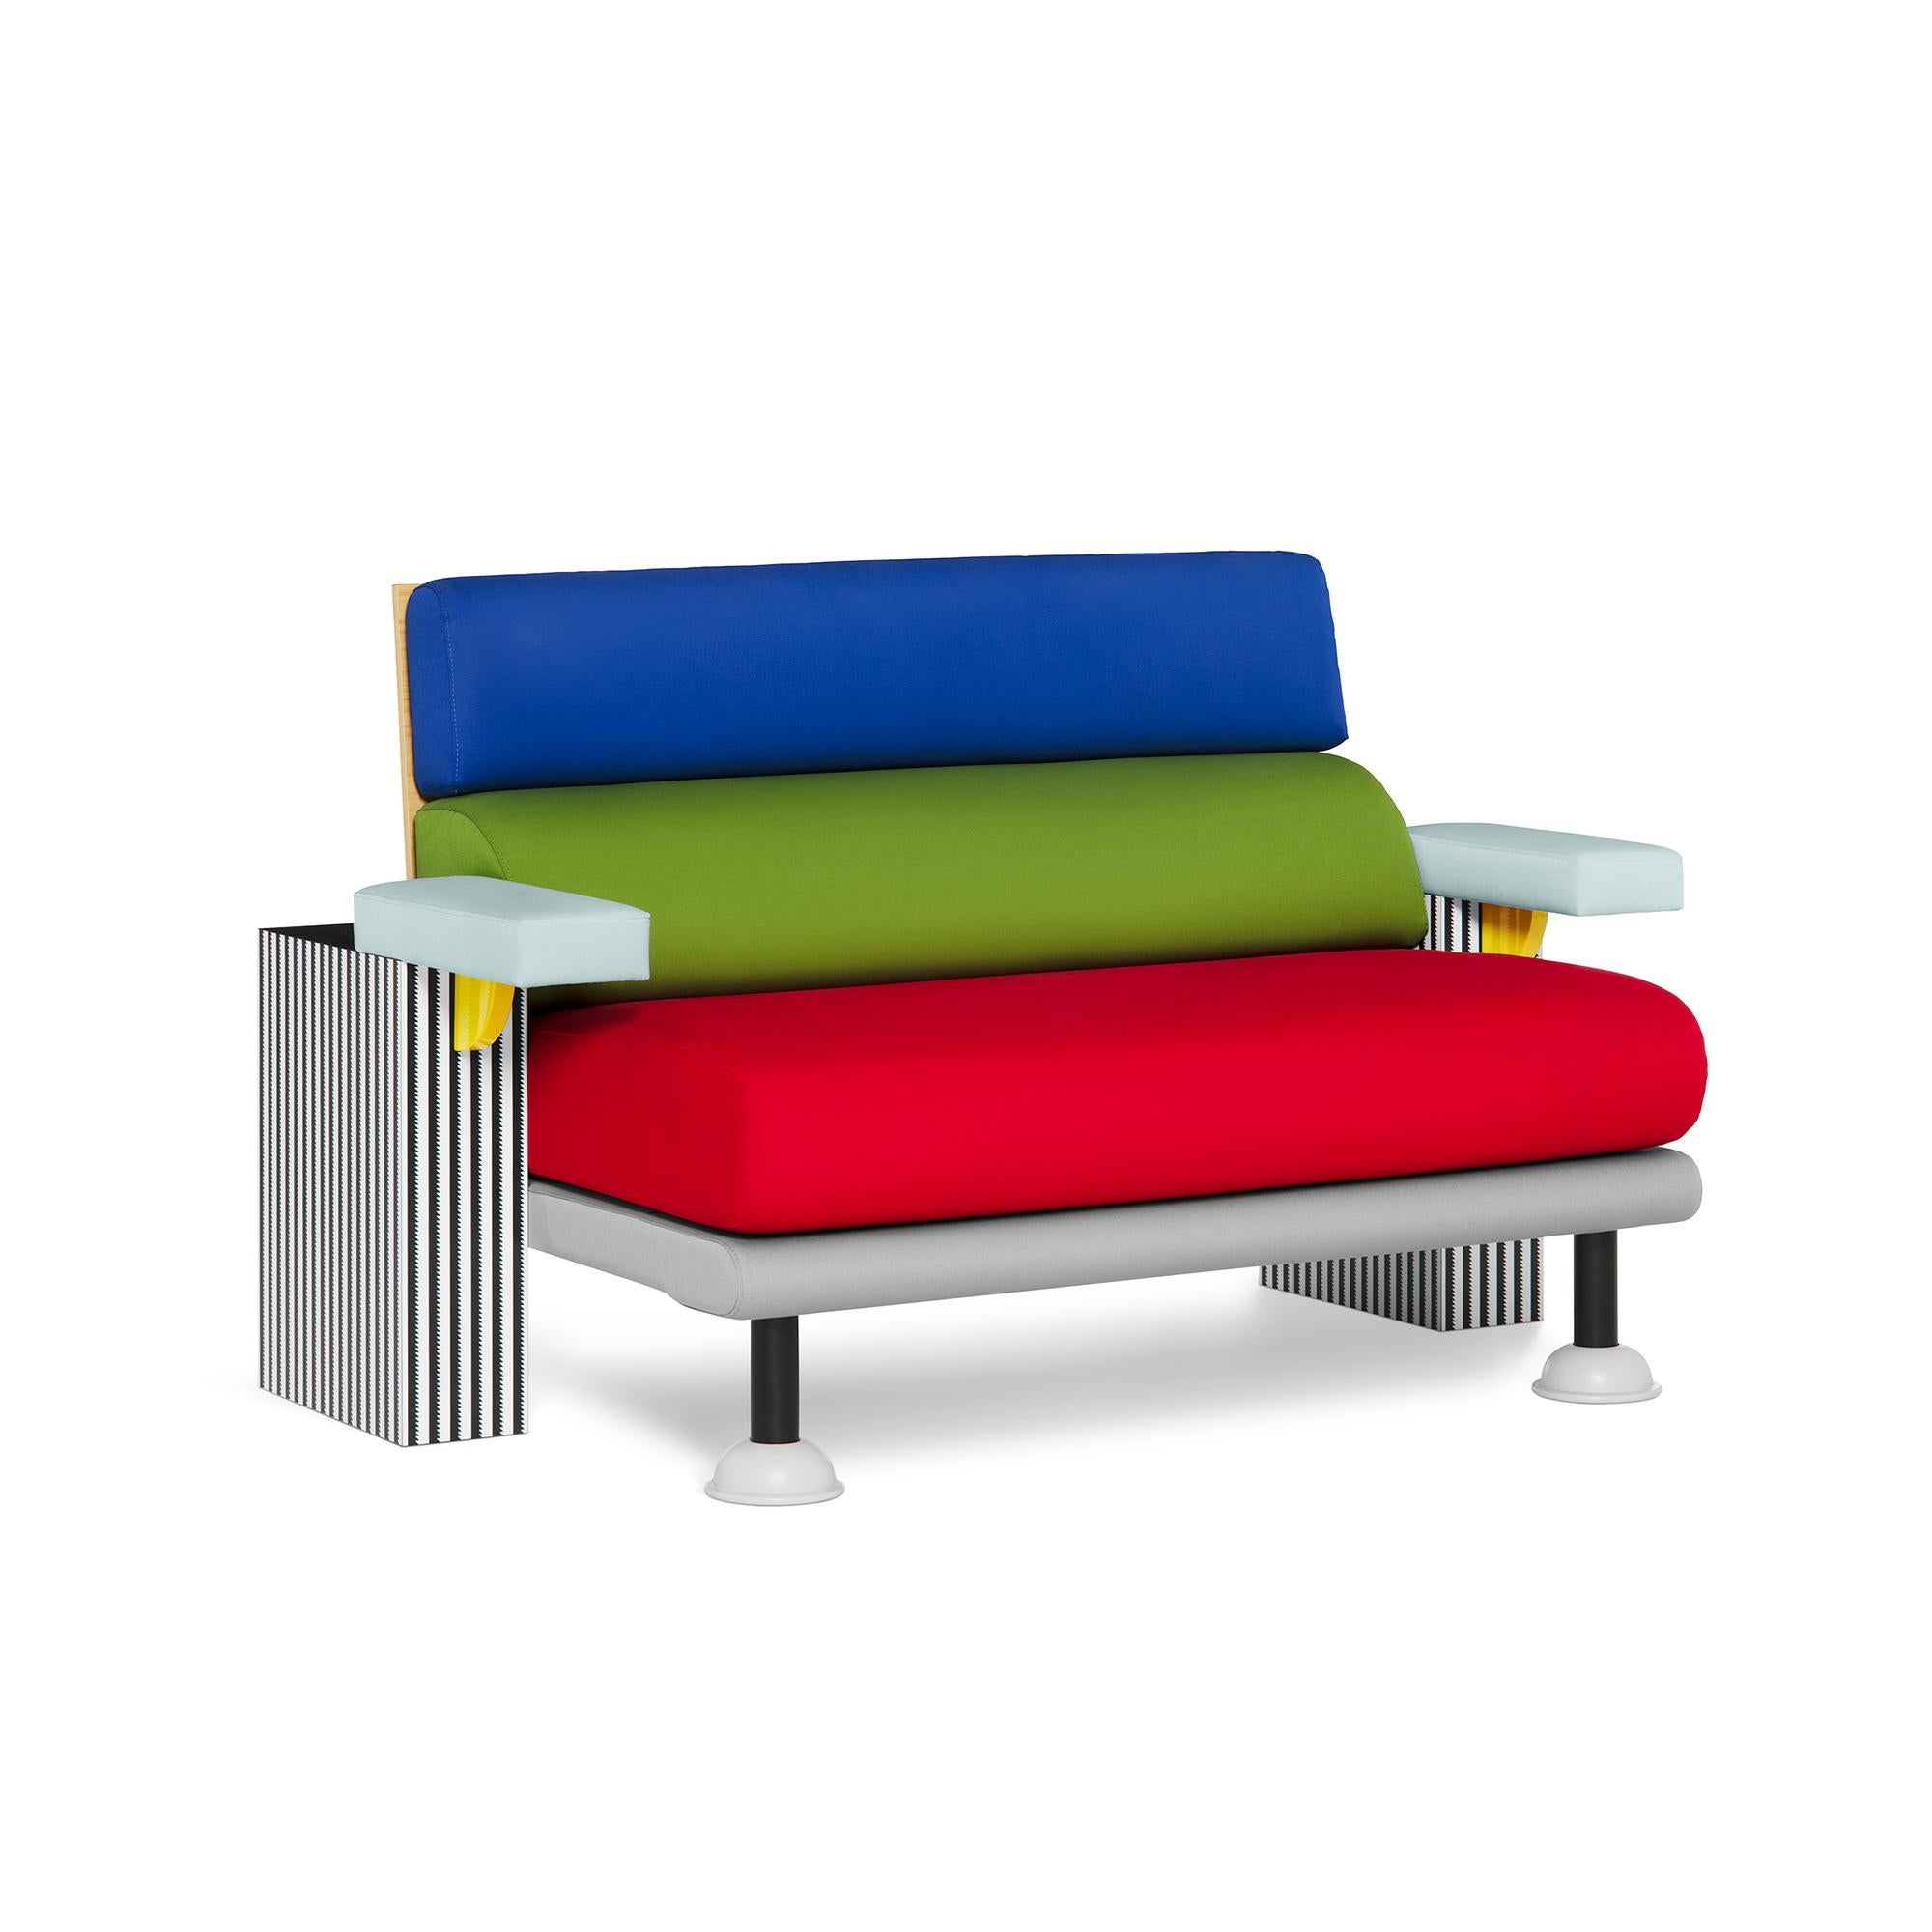 Wooden sofa covered with decorative laminate, metal elements, fabric upholstery.

Lido, a sofa created in 1982 by Michele De Lucchi, is eccentric and elegant at the same time. The juxtaposition of forms and volumes plays with the combination of